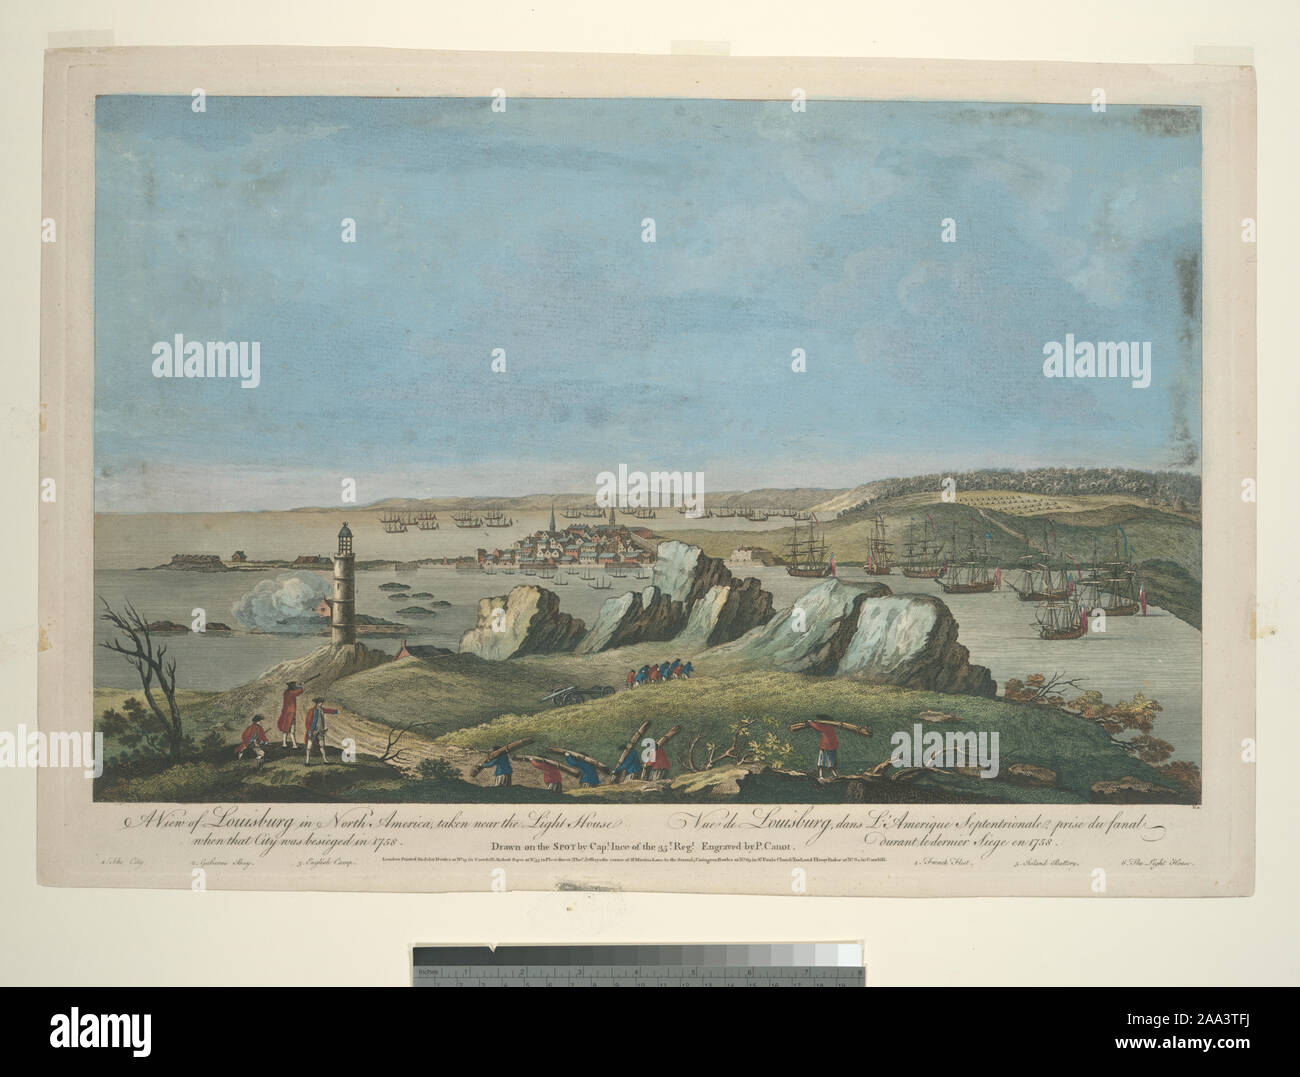 Stokes 1758-B-92 From Scenographia Americana, 1768. Print also published in London by Robert Sayer, Thomas Jefferys, Carington Bowles and Henry Parker. Print contains 6 references in lower margin. Deák 108; A view of Louisbourg in North America... = Vue de Louisbourg, dans l'Amérique septentrionale... Stock Photo